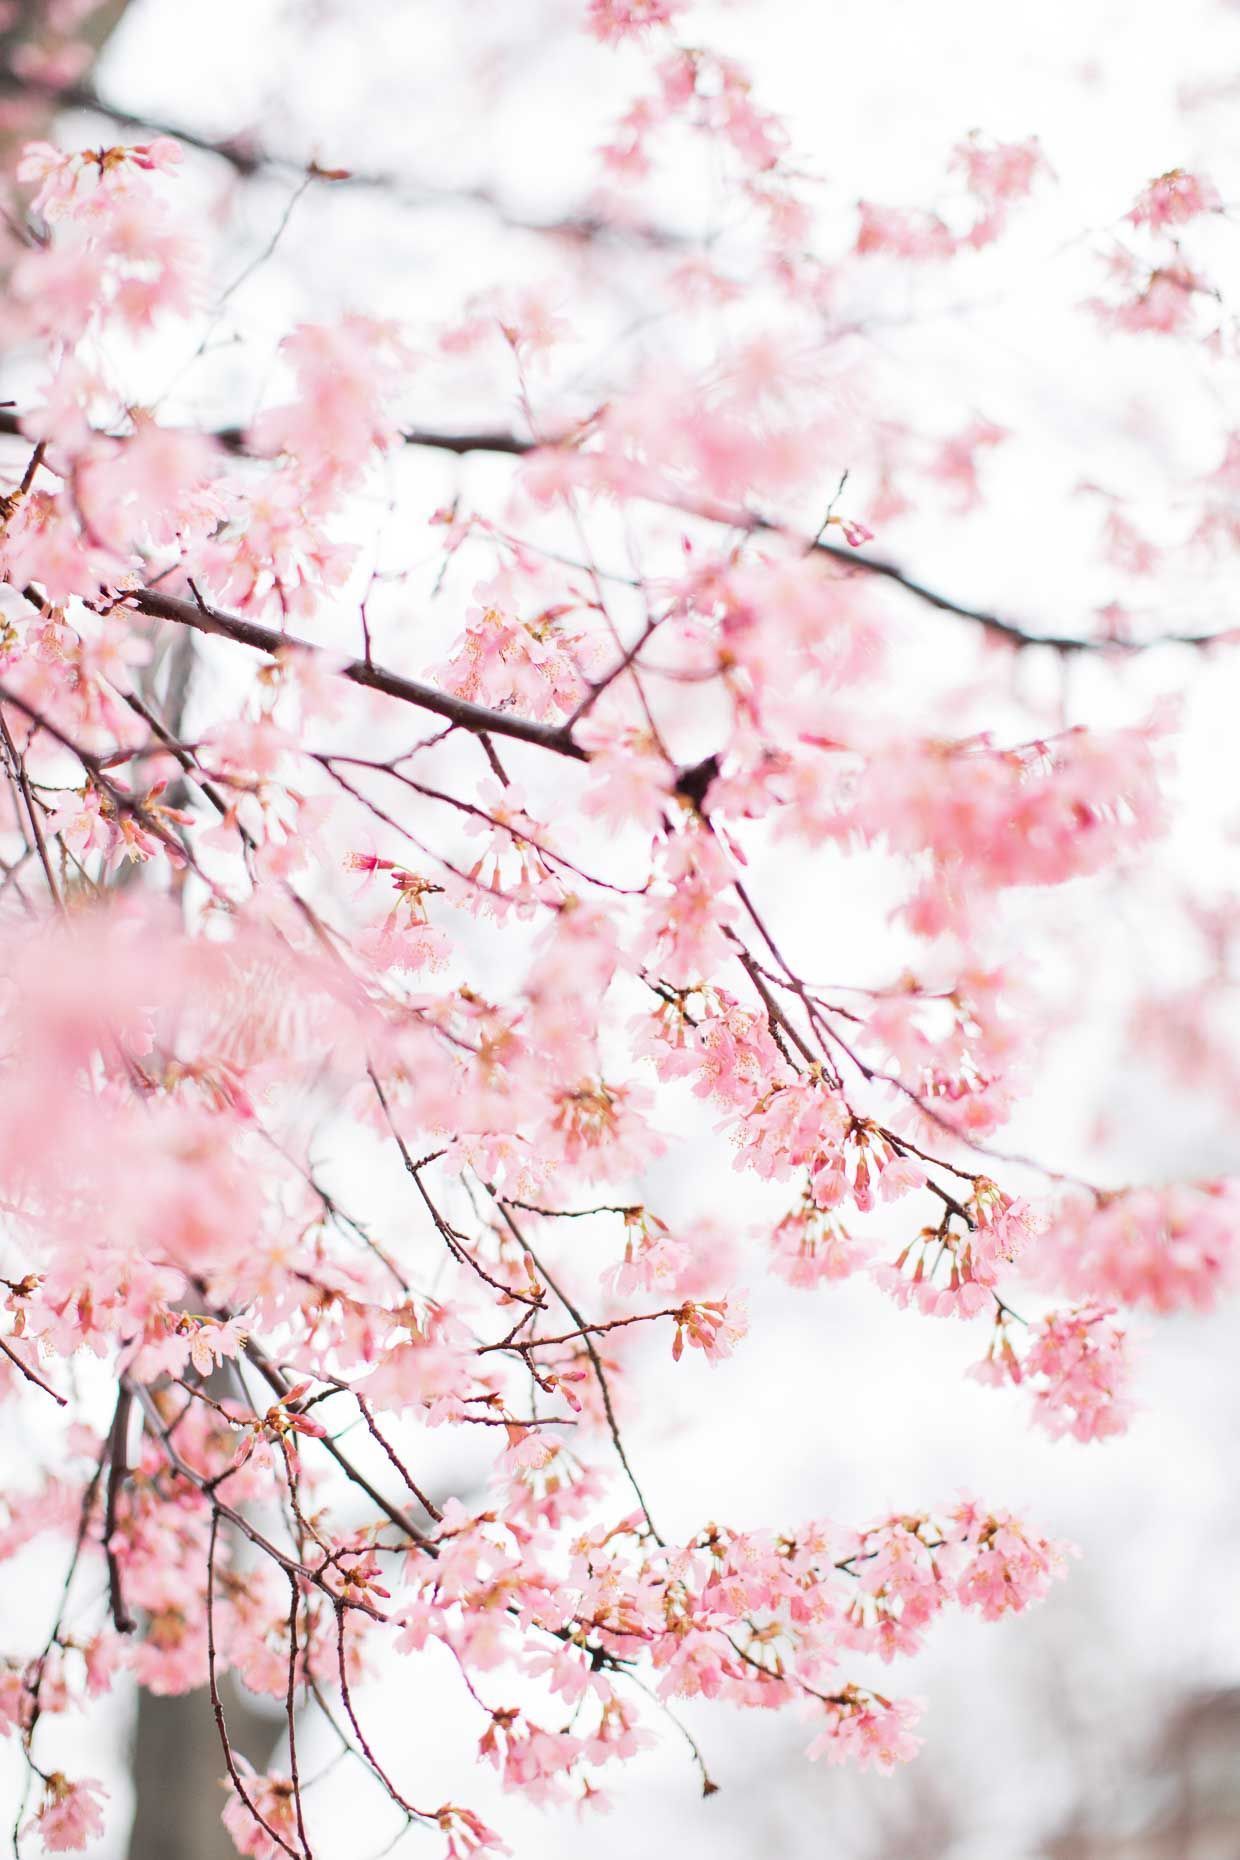 A close up of a tree with pink flowers - Blush